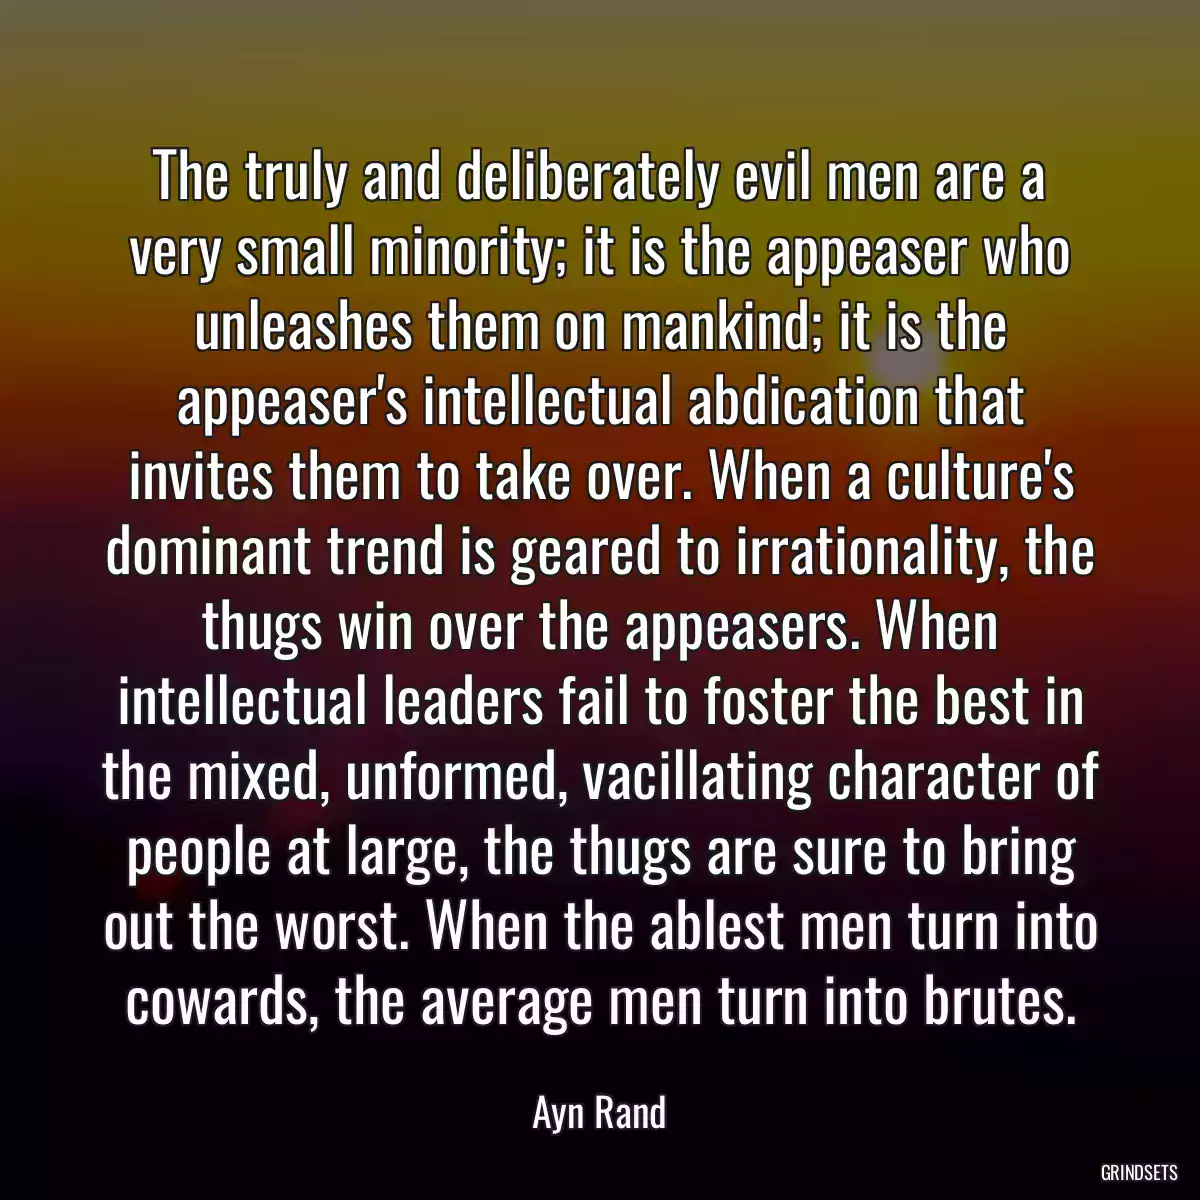 The truly and deliberately evil men are a very small minority; it is the appeaser who unleashes them on mankind; it is the appeaser\'s intellectual abdication that invites them to take over. When a culture\'s dominant trend is geared to irrationality, the thugs win over the appeasers. When intellectual leaders fail to foster the best in the mixed, unformed, vacillating character of people at large, the thugs are sure to bring out the worst. When the ablest men turn into cowards, the average men turn into brutes.